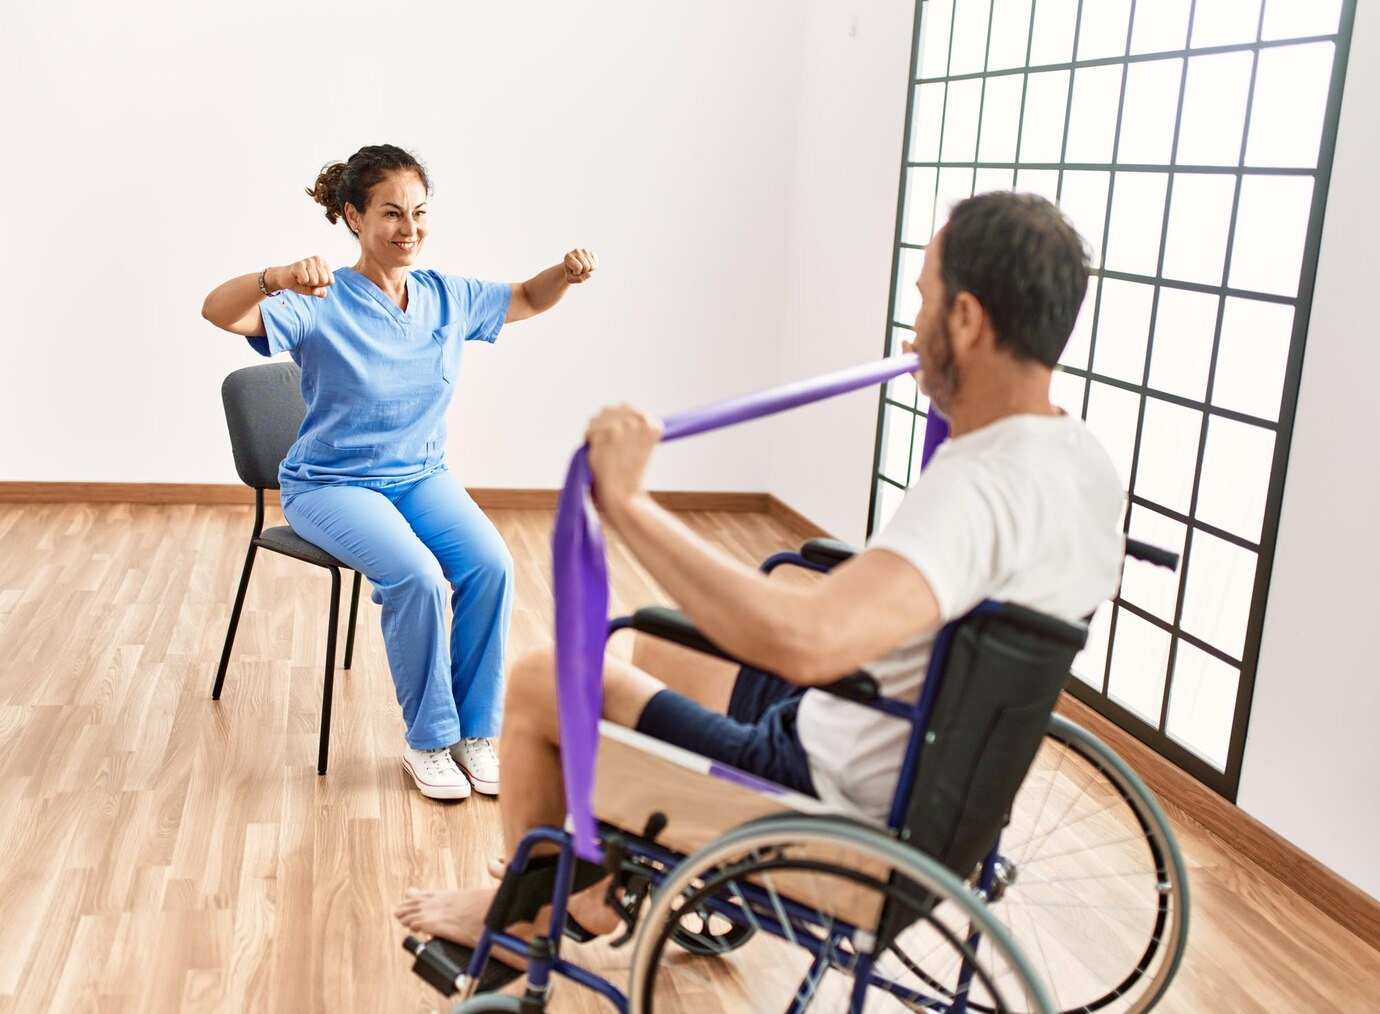 Explore Our Therapy and Rehabilitation Services